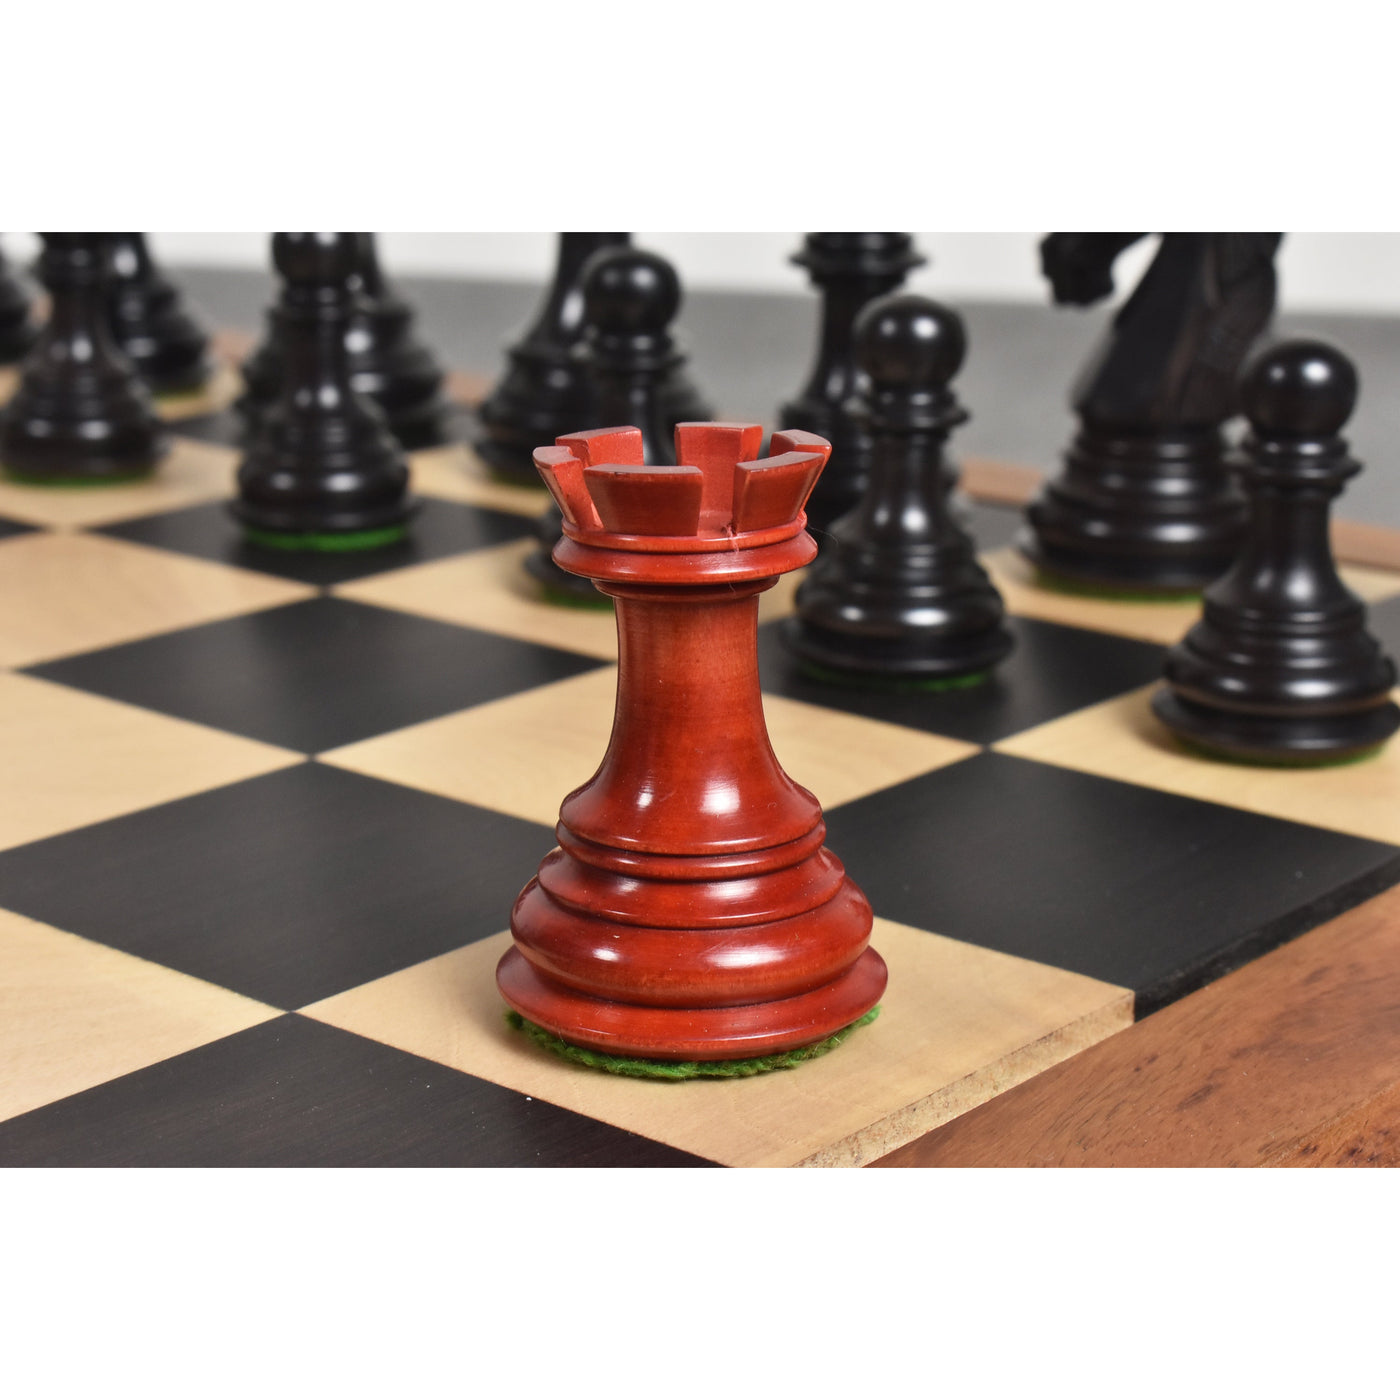 Slightly Imperfect 3.9" Old Columbian Staunton Weighted Chess Set - Chess Pieces Only- Crimson & Ebonised Boxwood